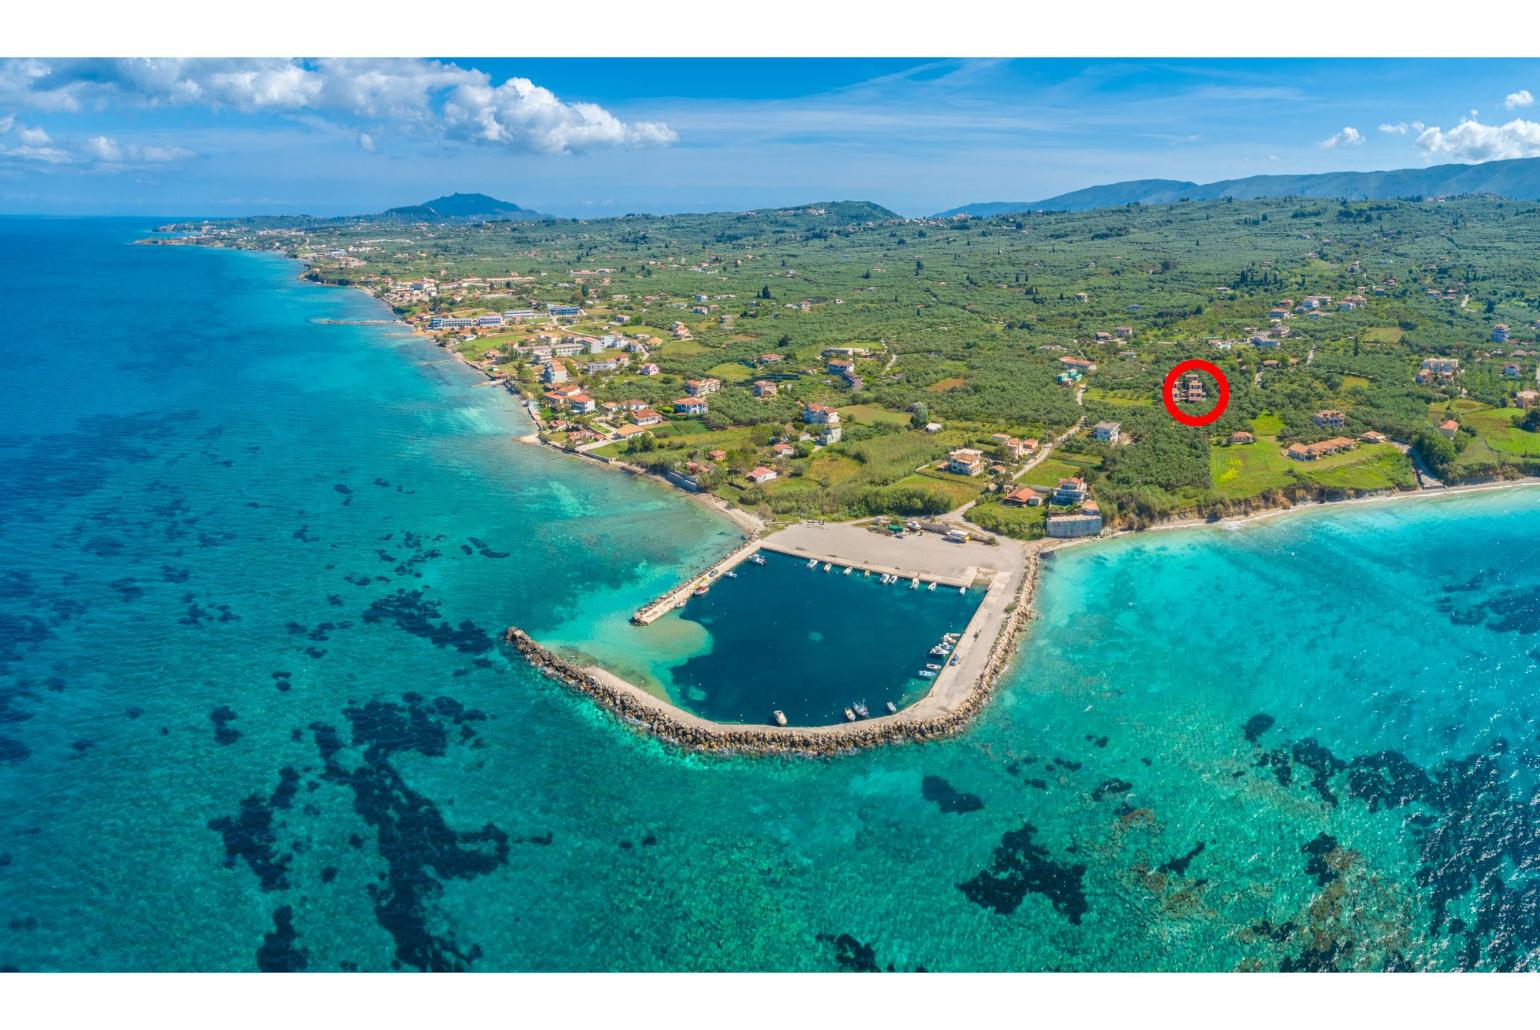 Aerial view showing location of Villa Diony